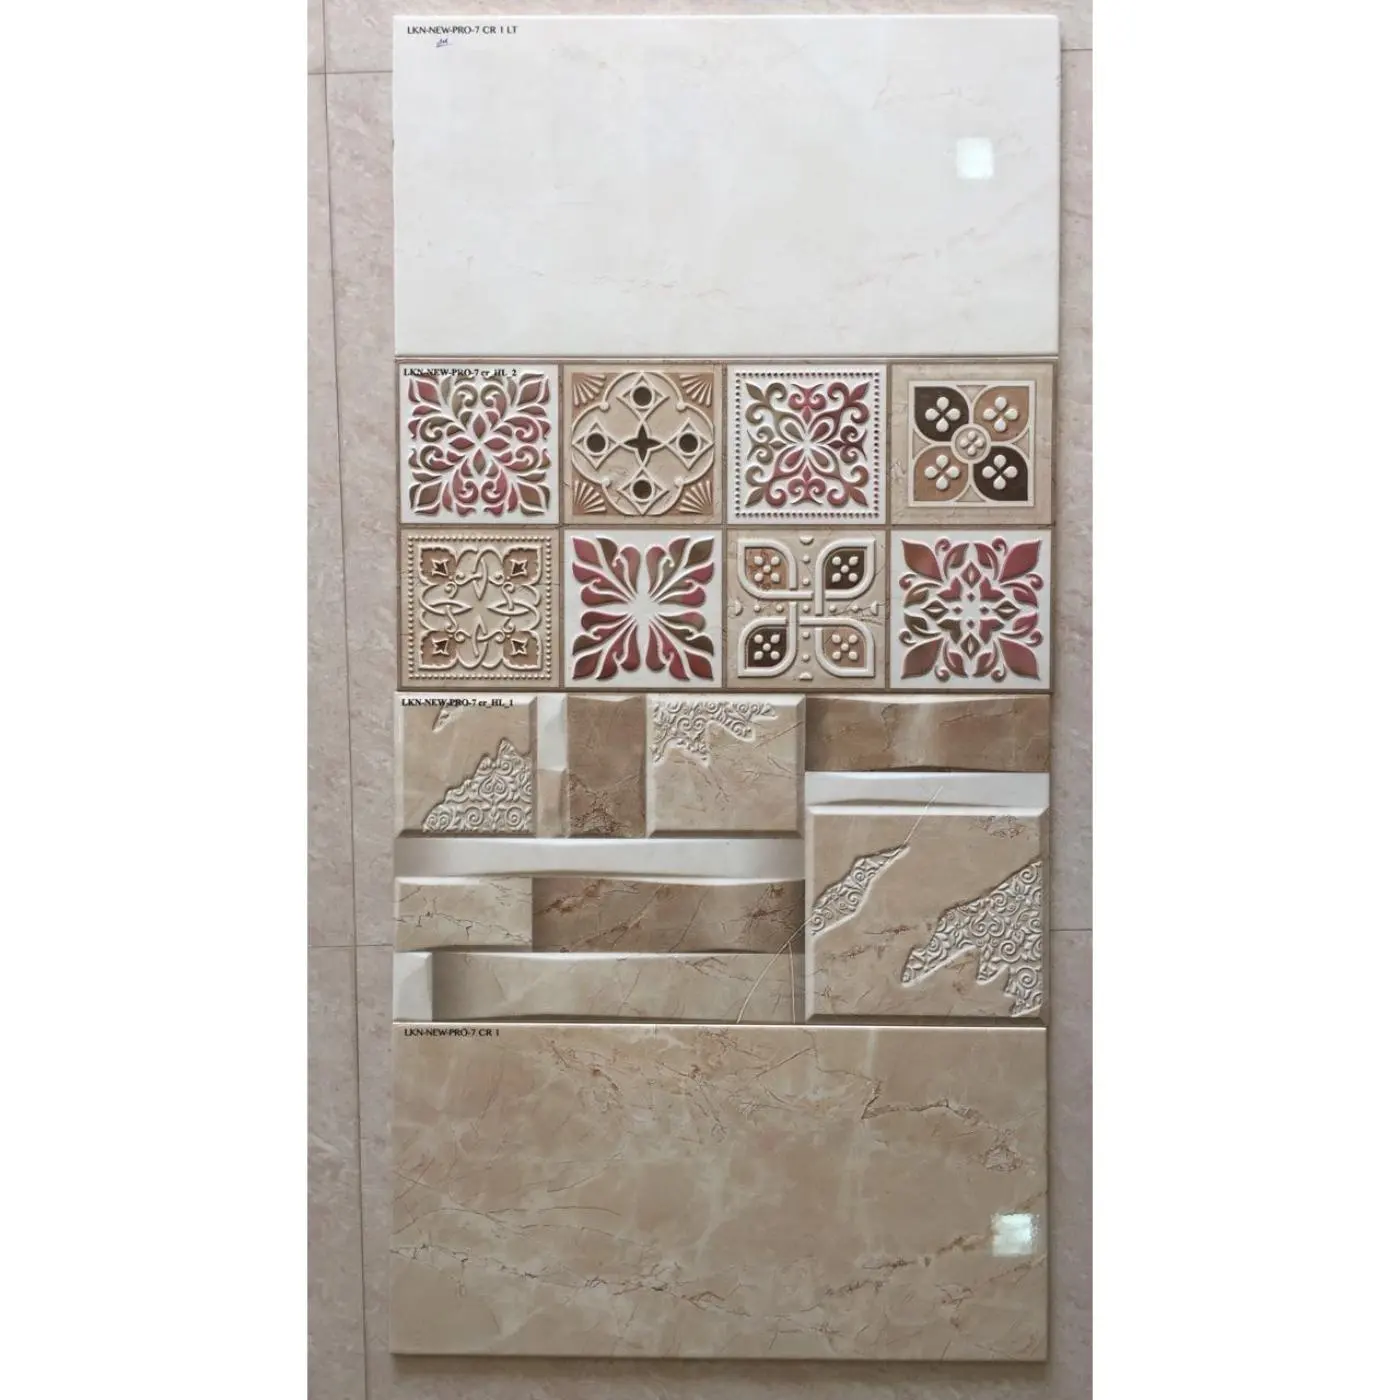 Spain Latest Design 30x60cm Cheap Price Promotional 30x60cm Ceramic Porcelain Wall 300x600mm Wall Tiles in Kuwait Wholesale Rate